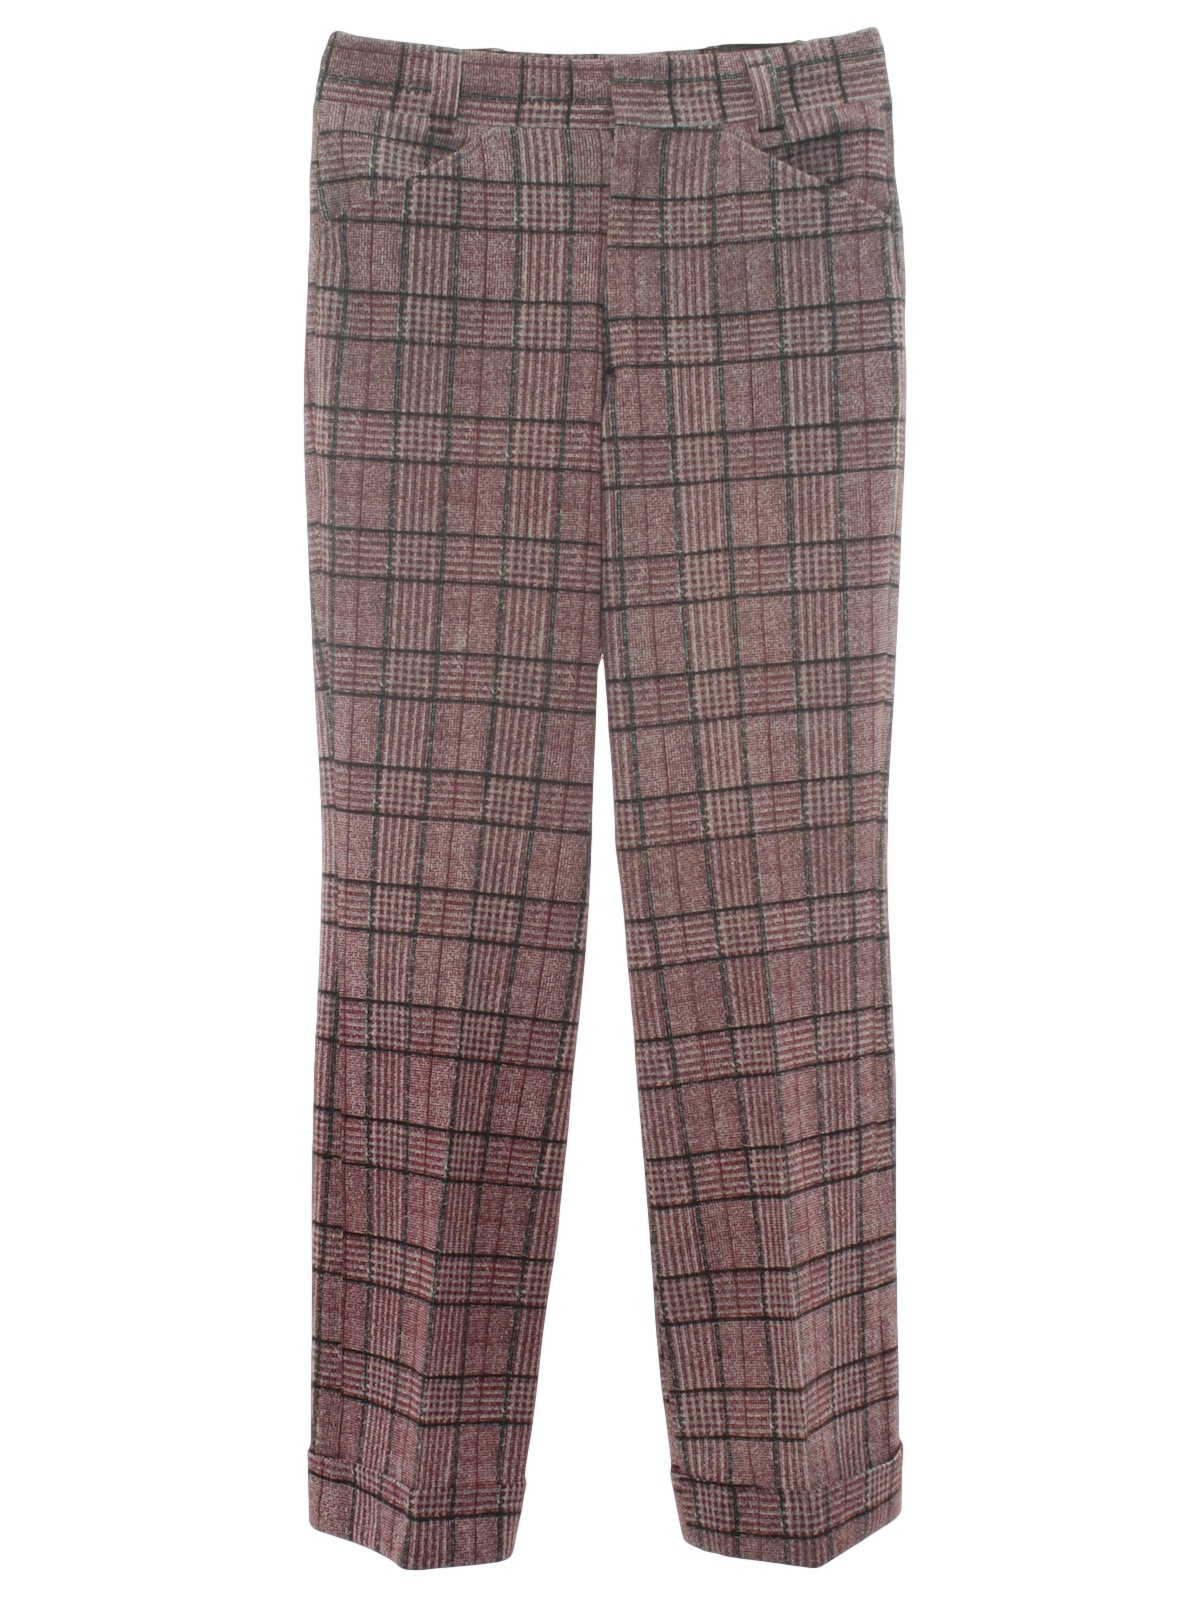 70s Flared Pants / Flares (Esi): 70s -Esi-Knits by Moyer- Mens dark red ...